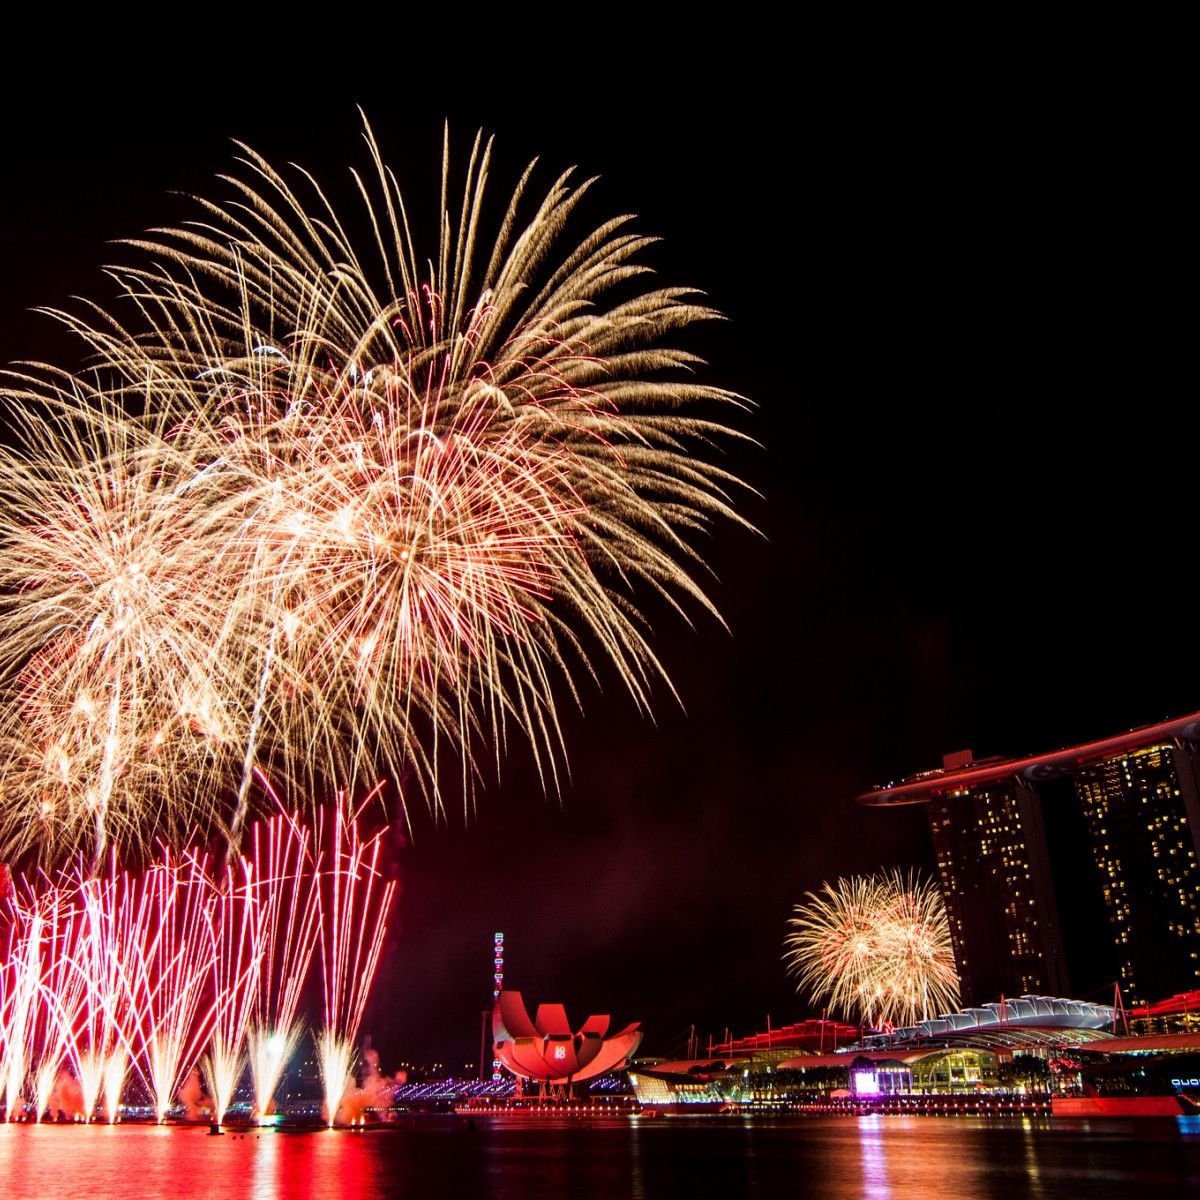 Where To Watch Chinese New Year Fireworks In Singapore